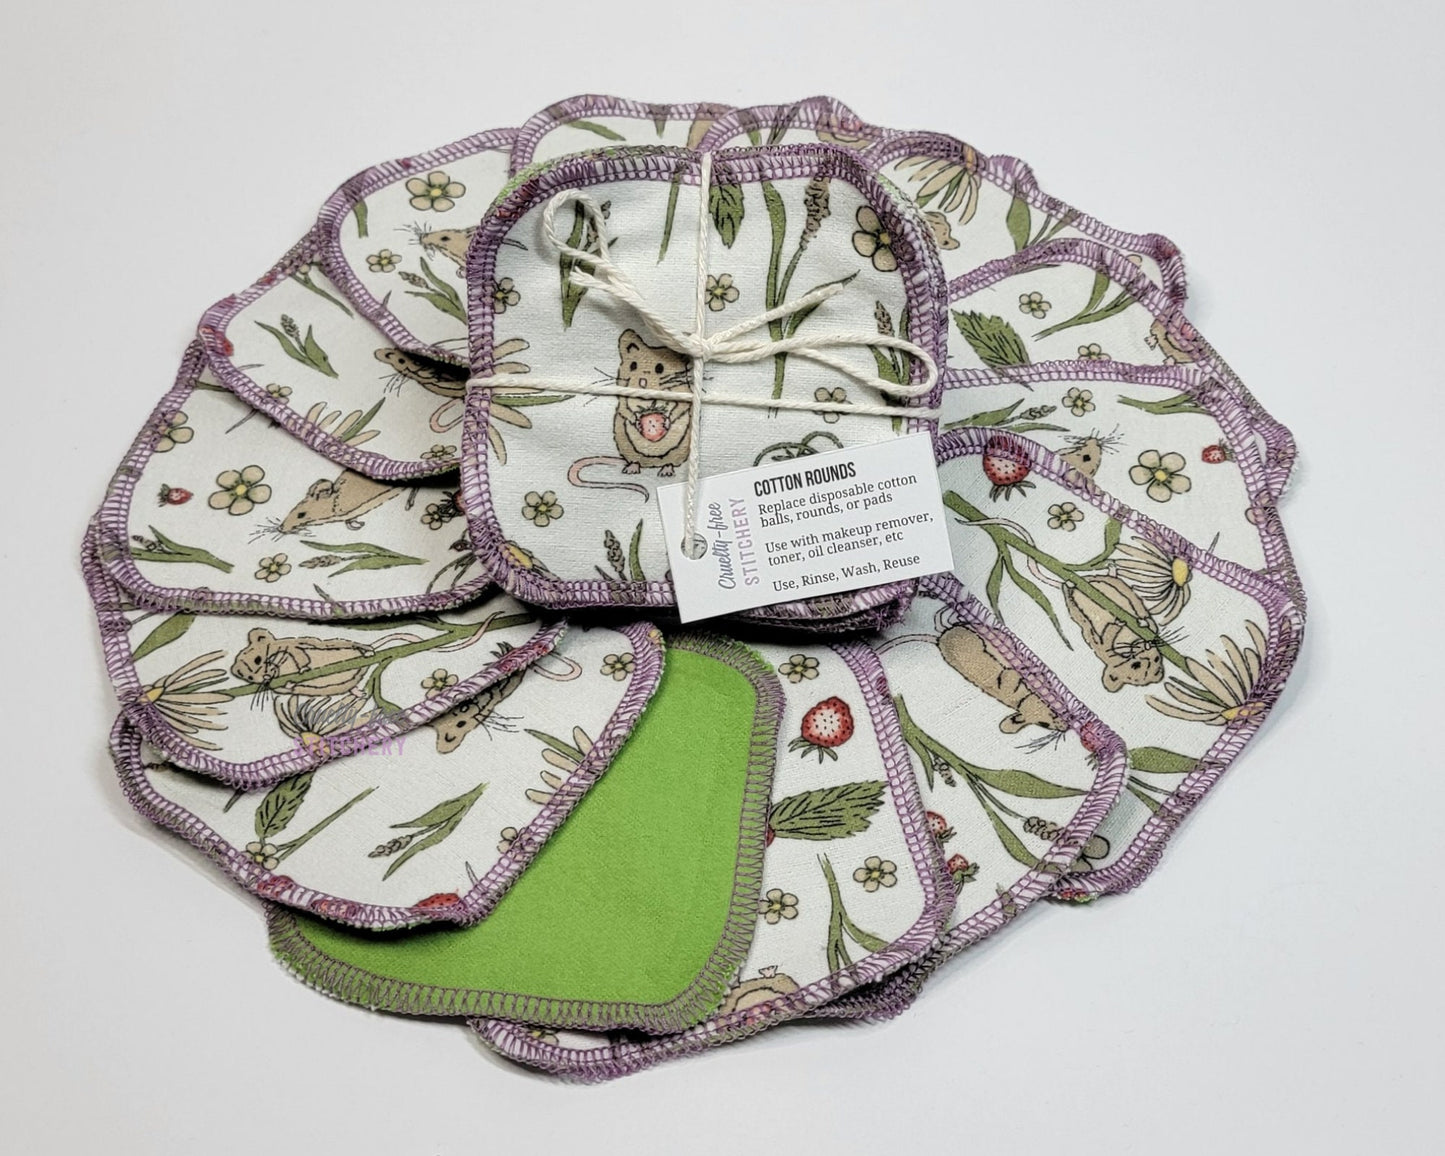 Mouse print reusable cotton rounds, arranged in a circle with a bundled pack in the center. They are a rounded square shape, and stitched together with light purple thread.